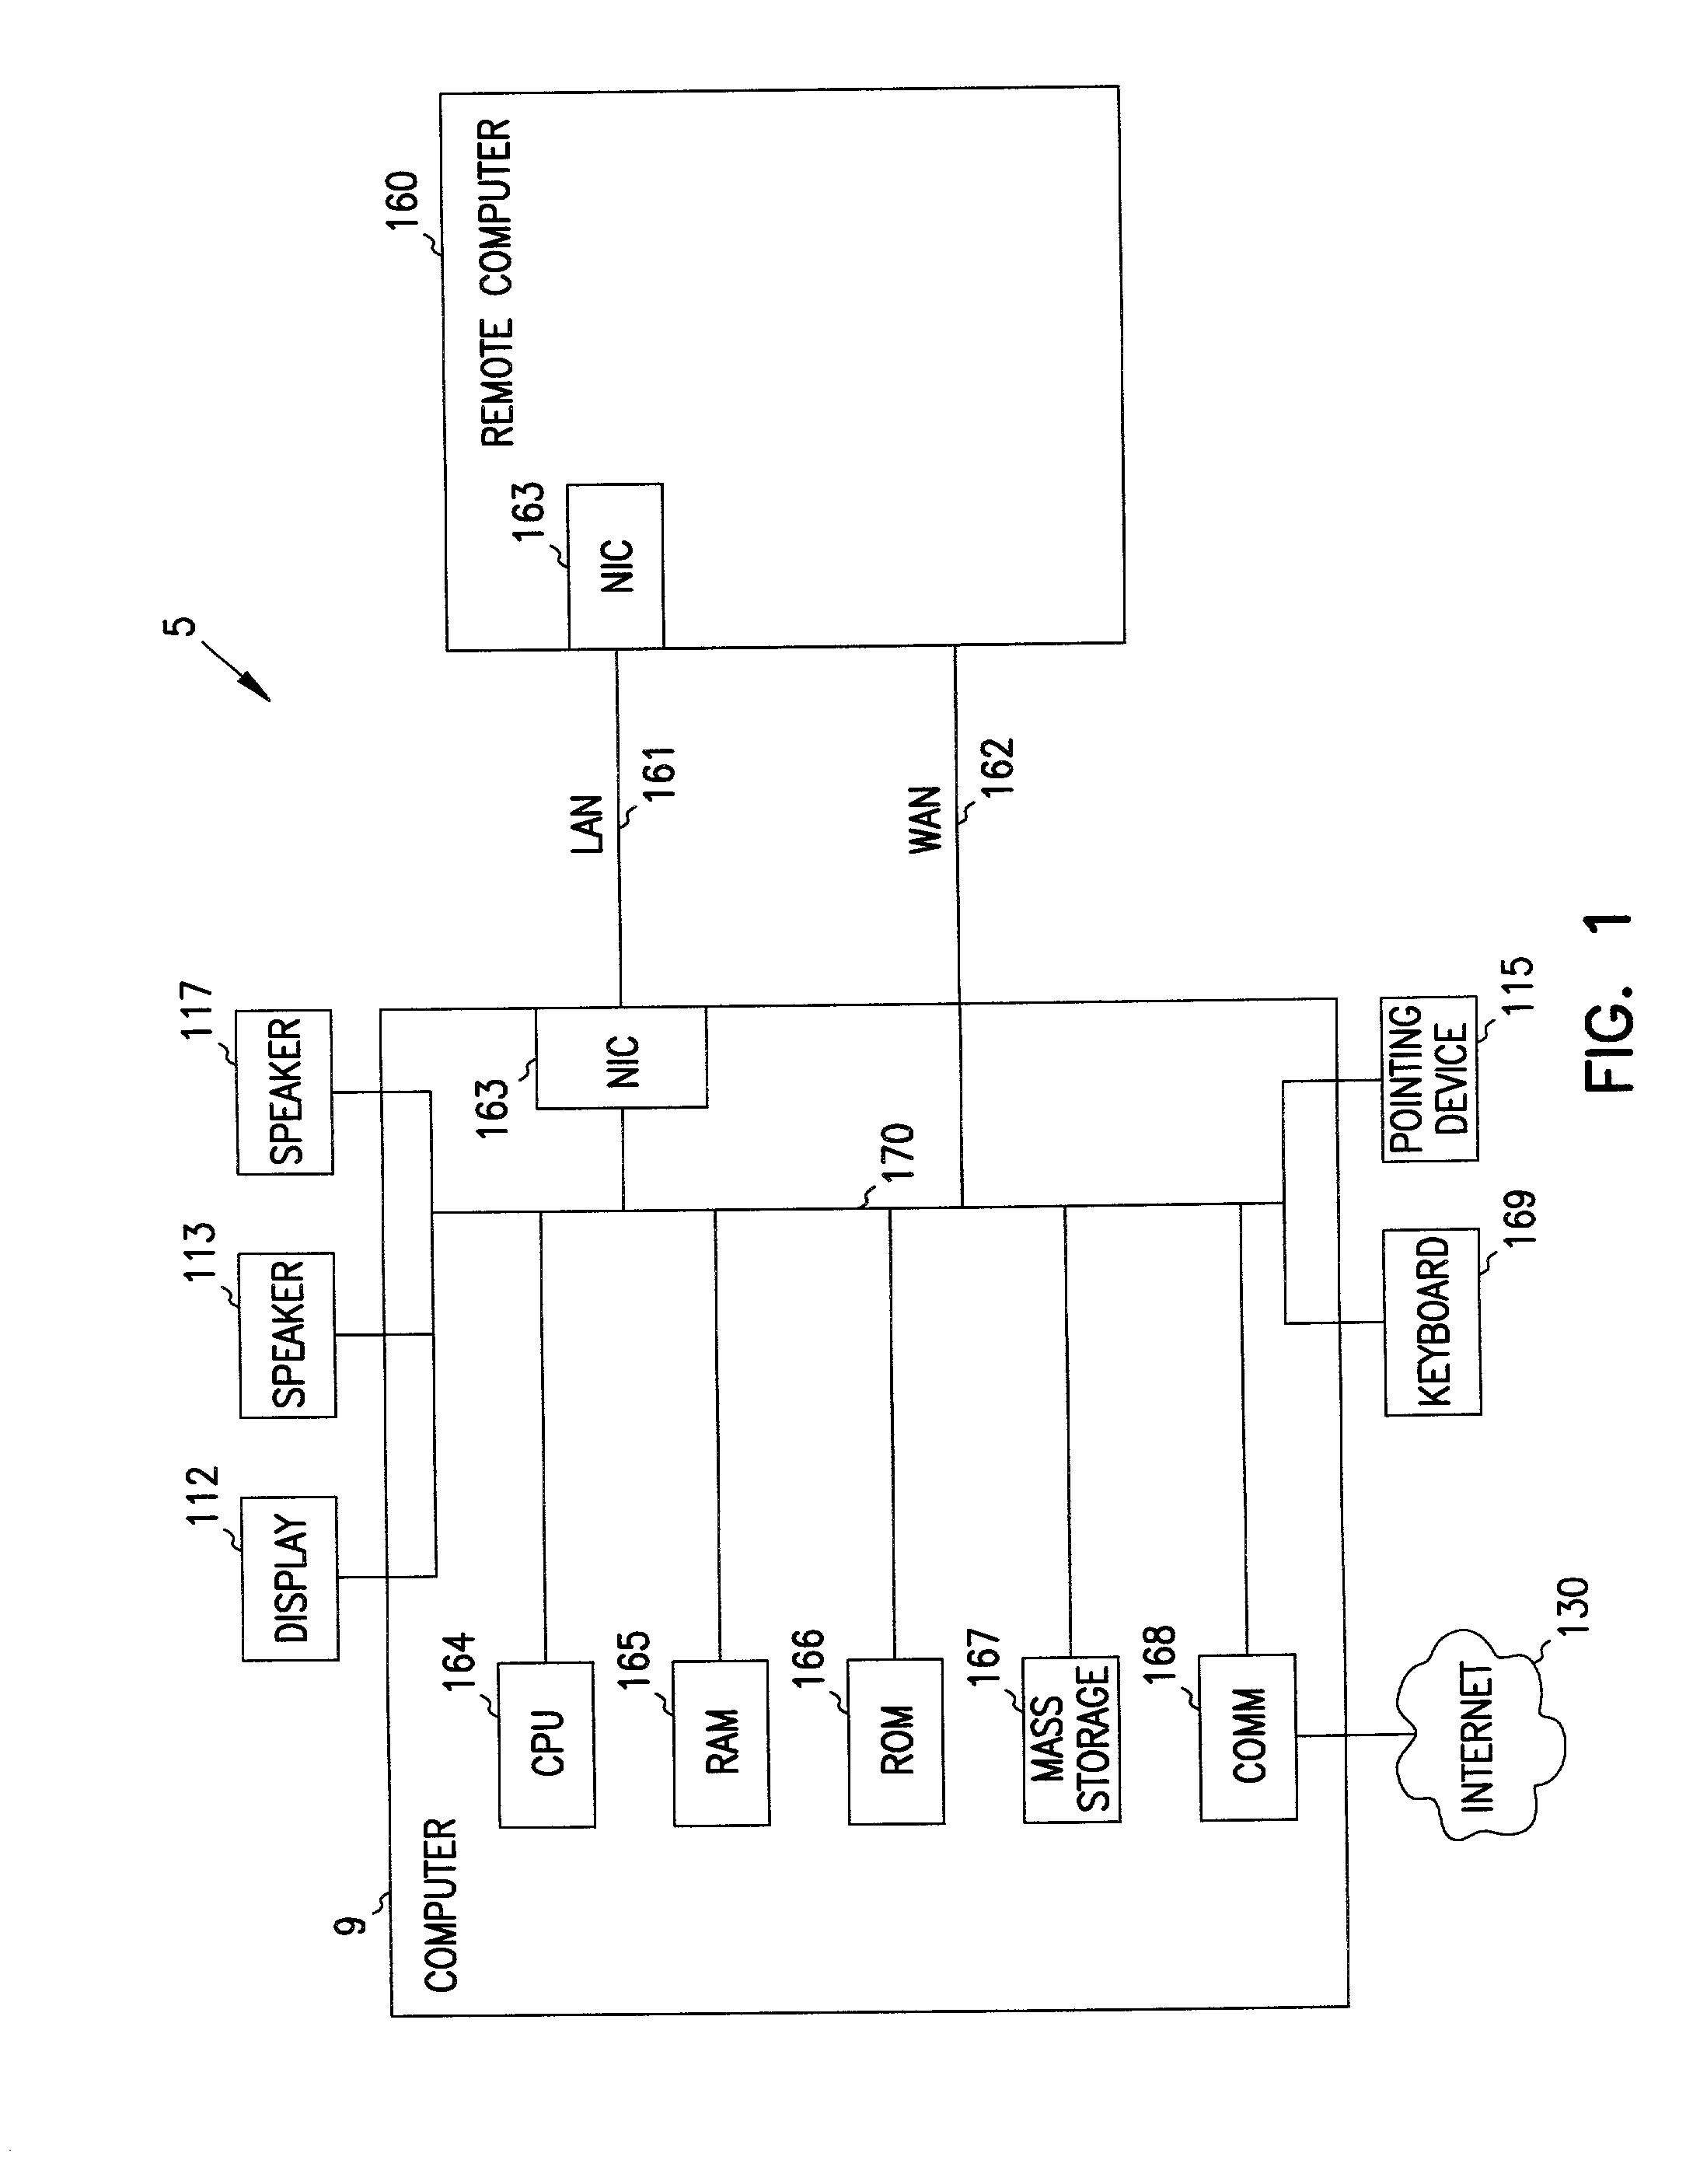 System and method for efficient remote operation of real-time graphical applications